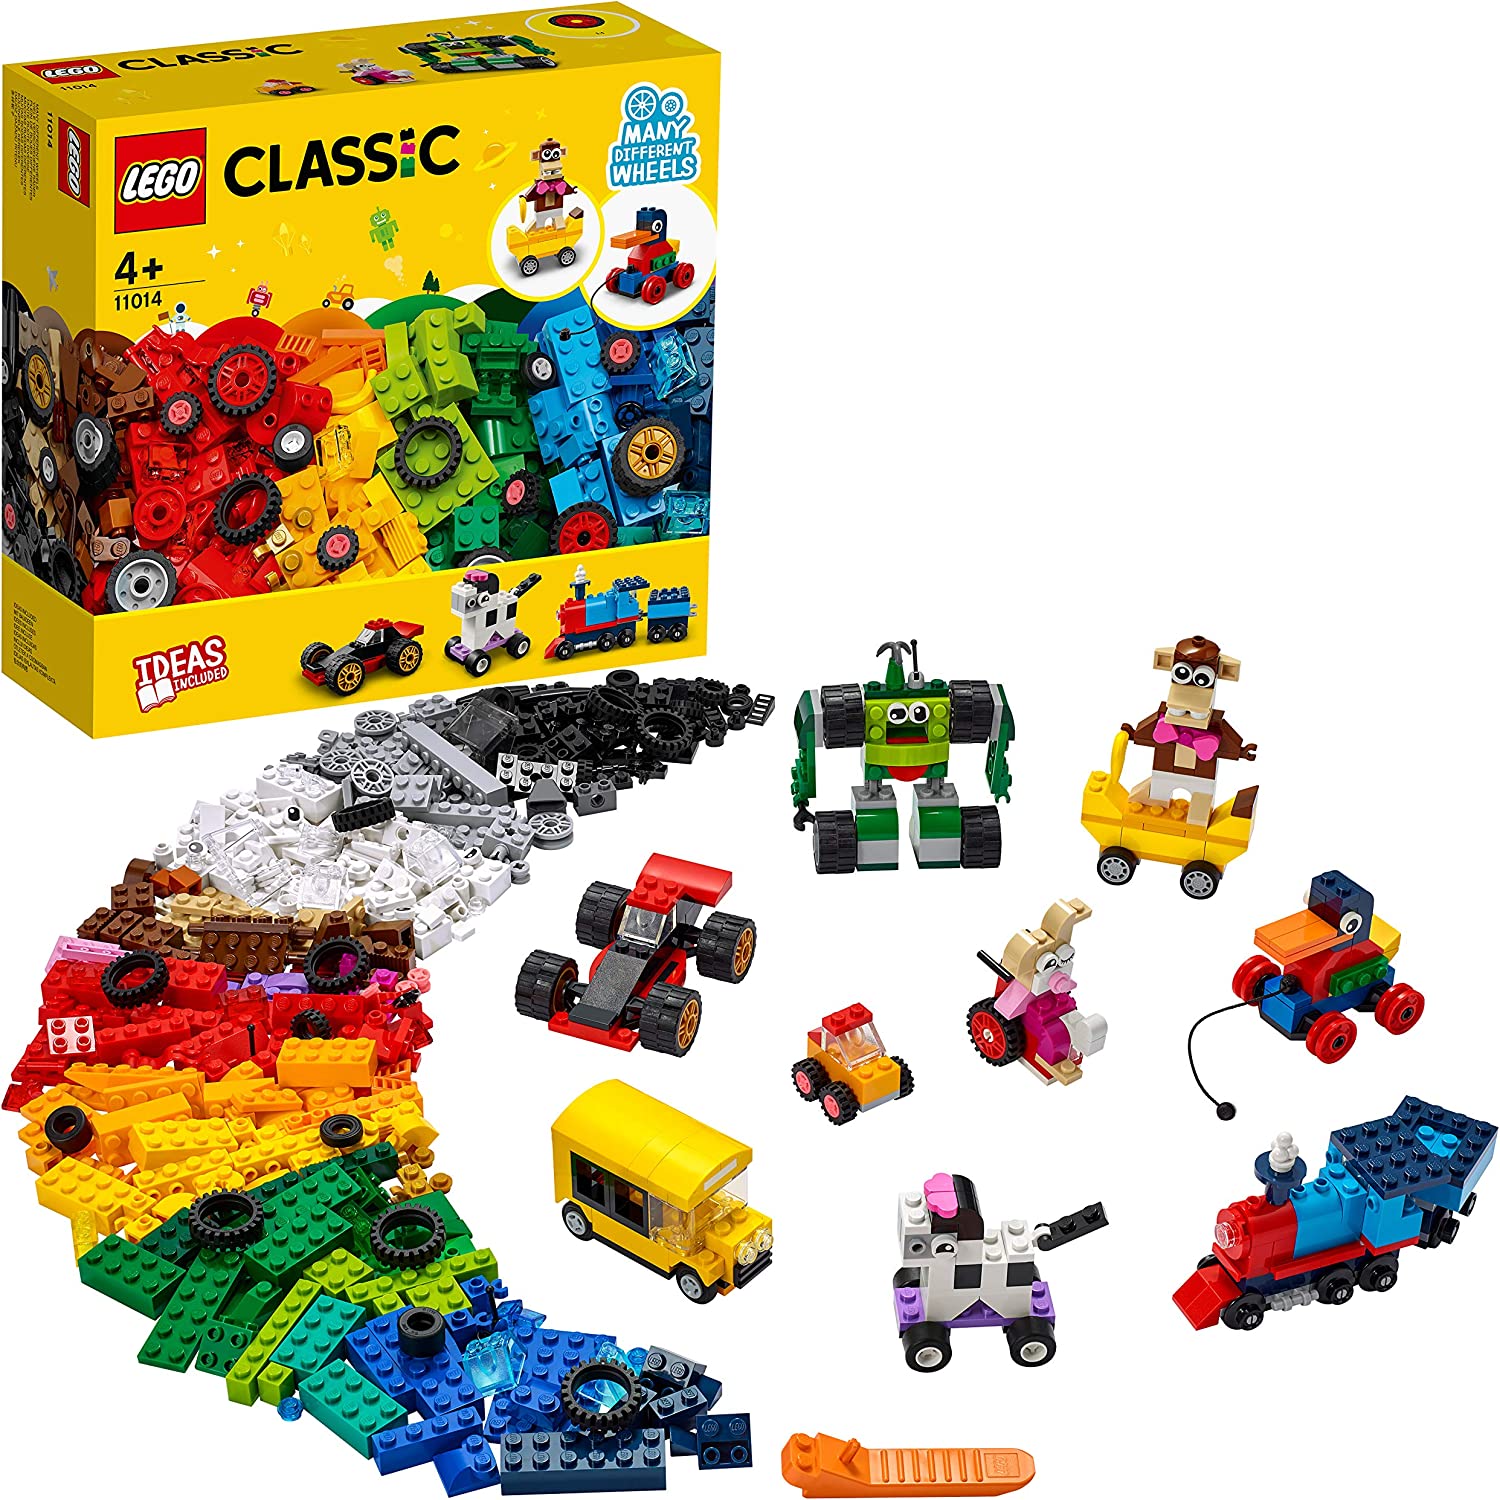 LEGO 11014 Classic Stone Box with Wheels Starter Construction Kit for Children from 4 Years with Toy Car, Train, Bus, Robot and More